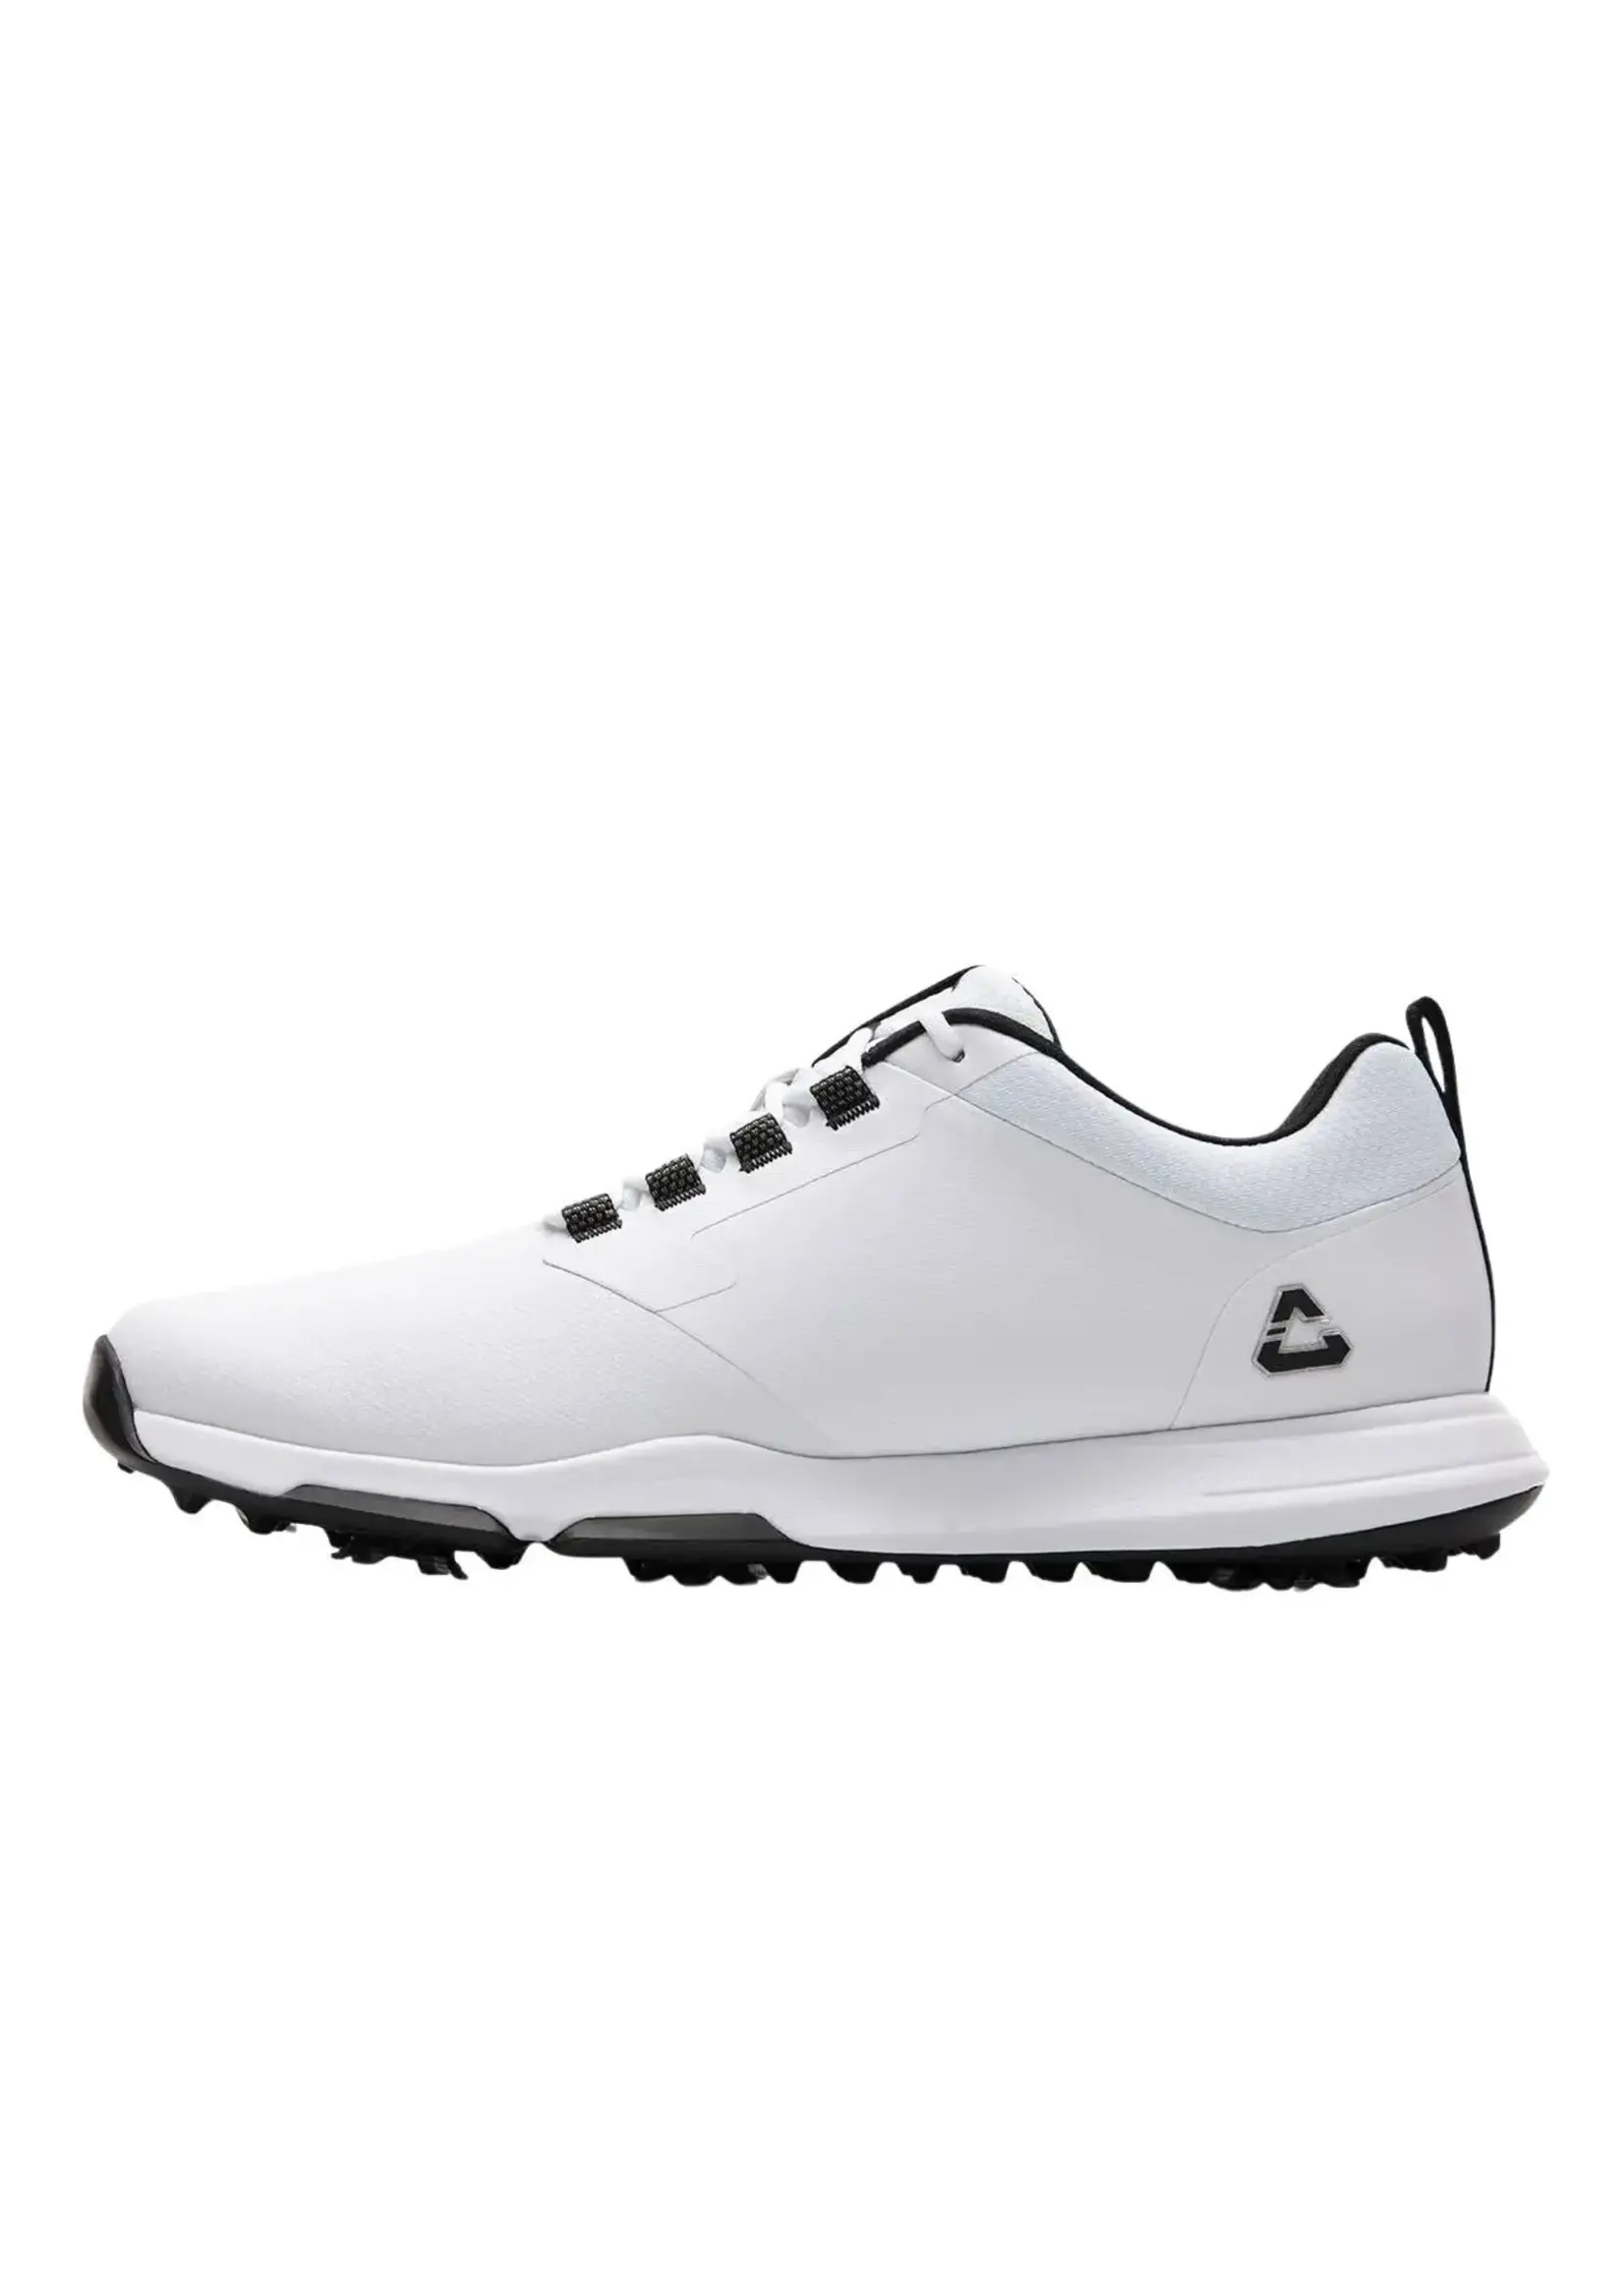 Cuater The Ringer Golf Shoe